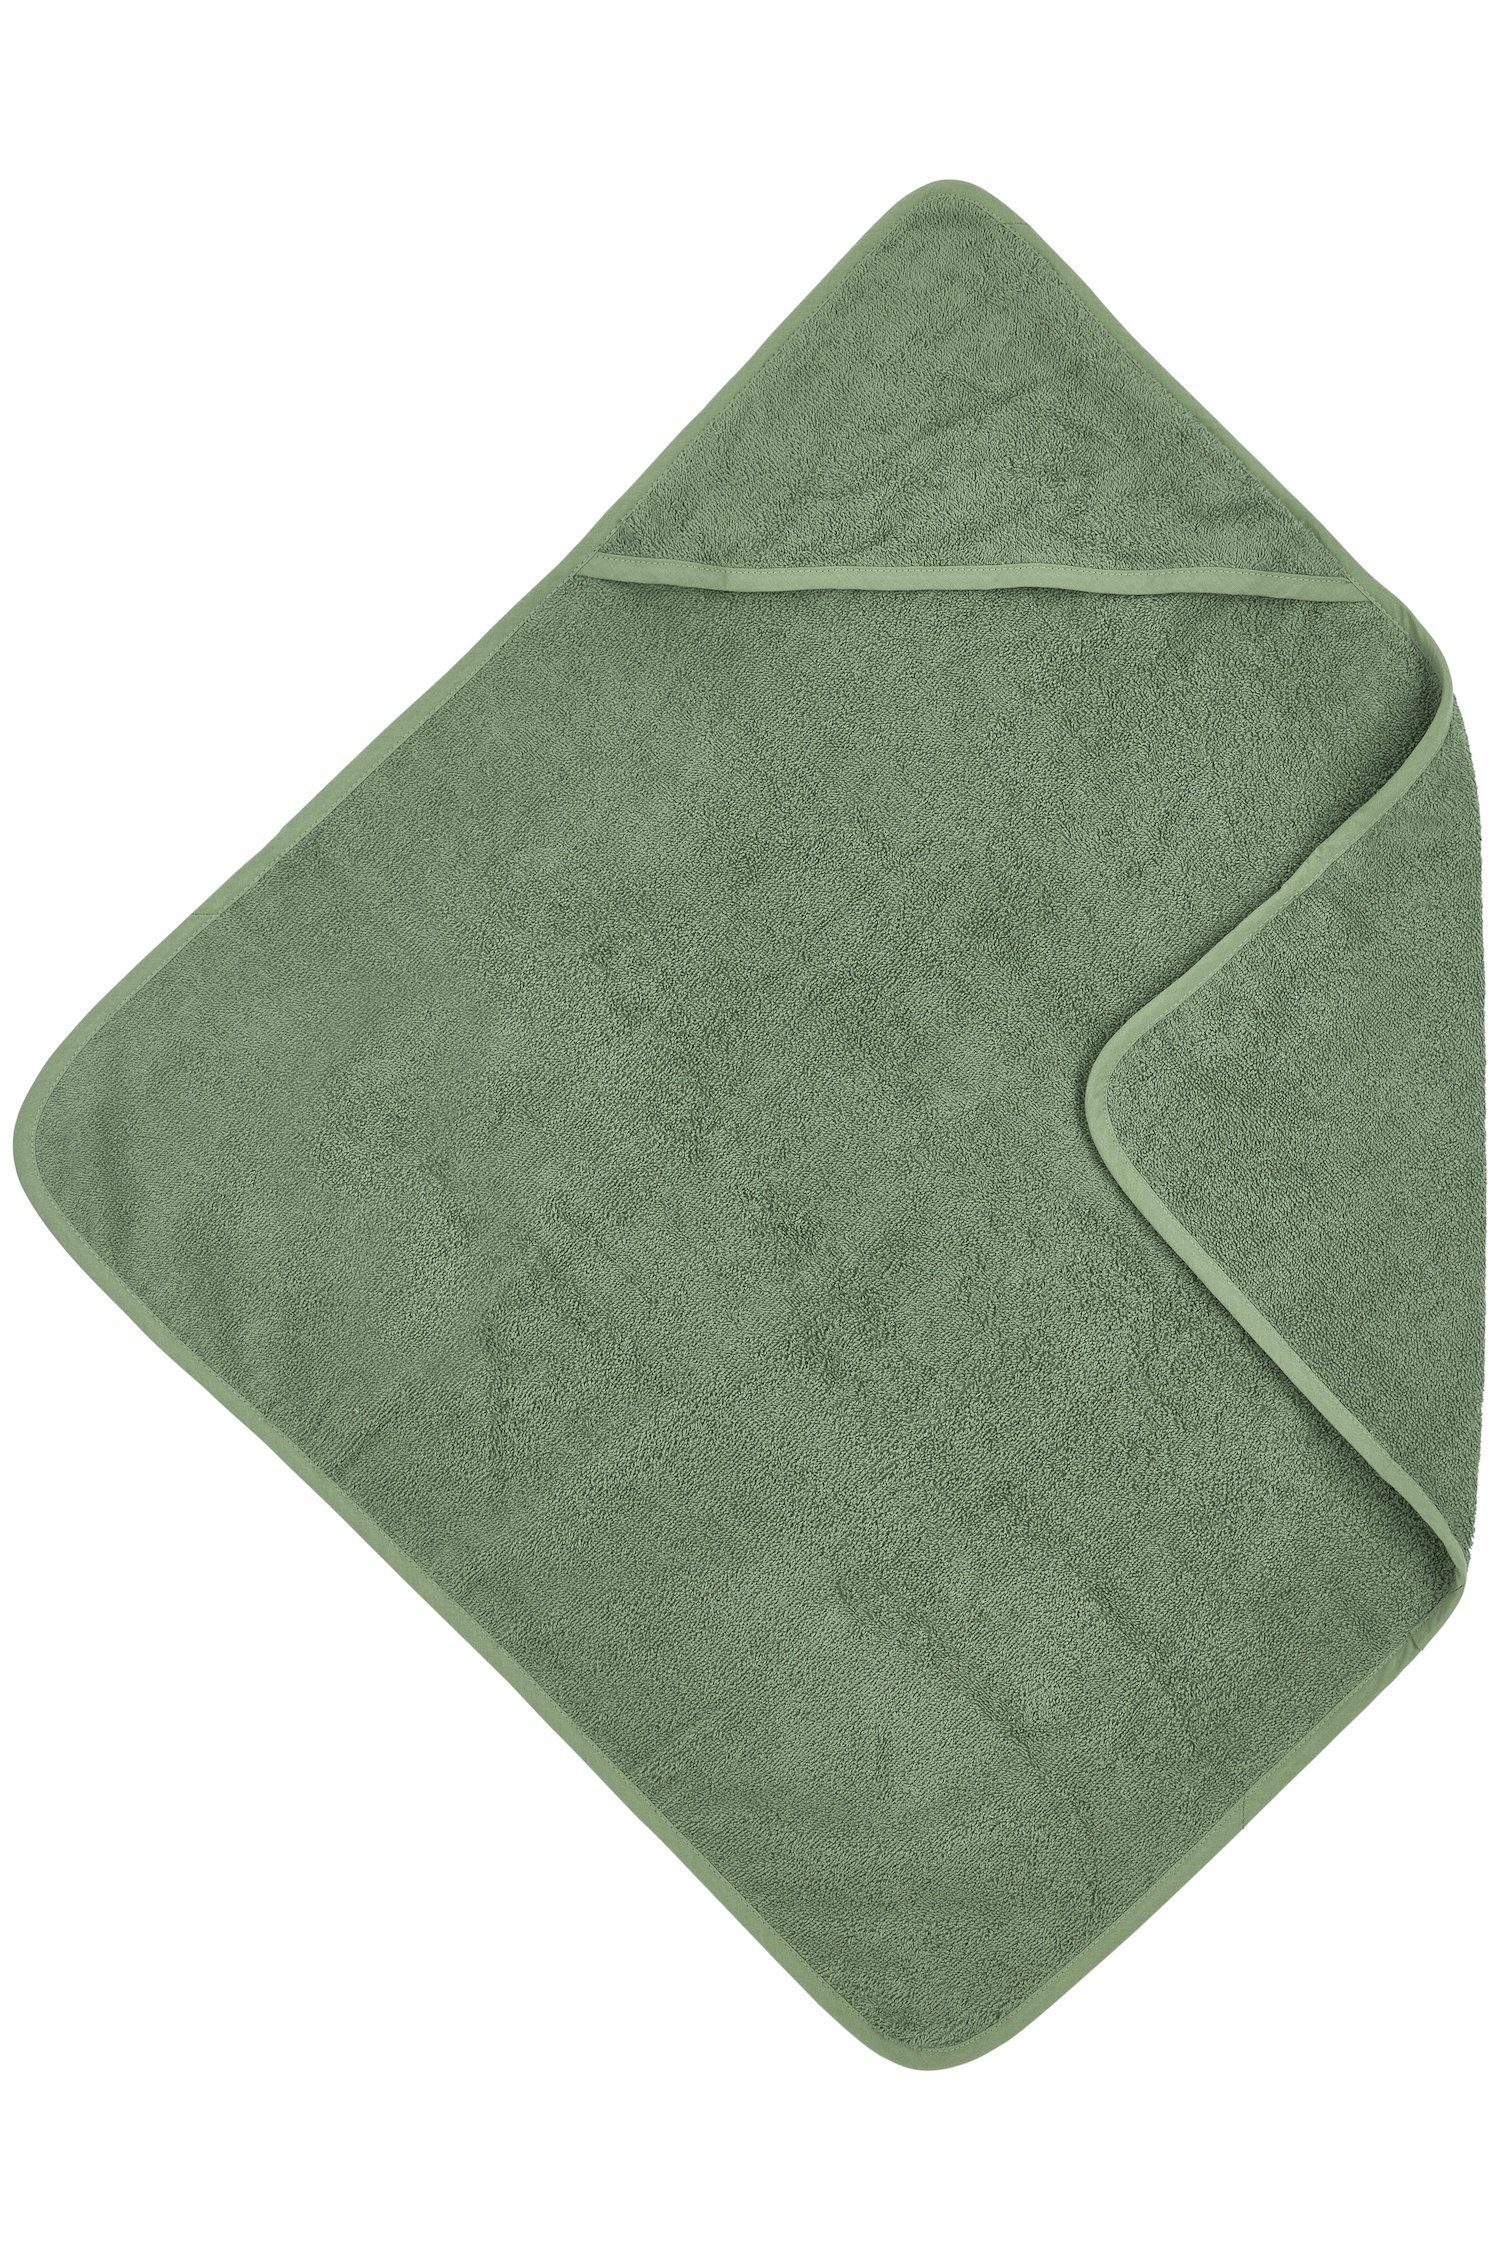 Meyco Baby Kapuzenhandtuch Uni Forest Green, Frottee (1-St), 75x75cm